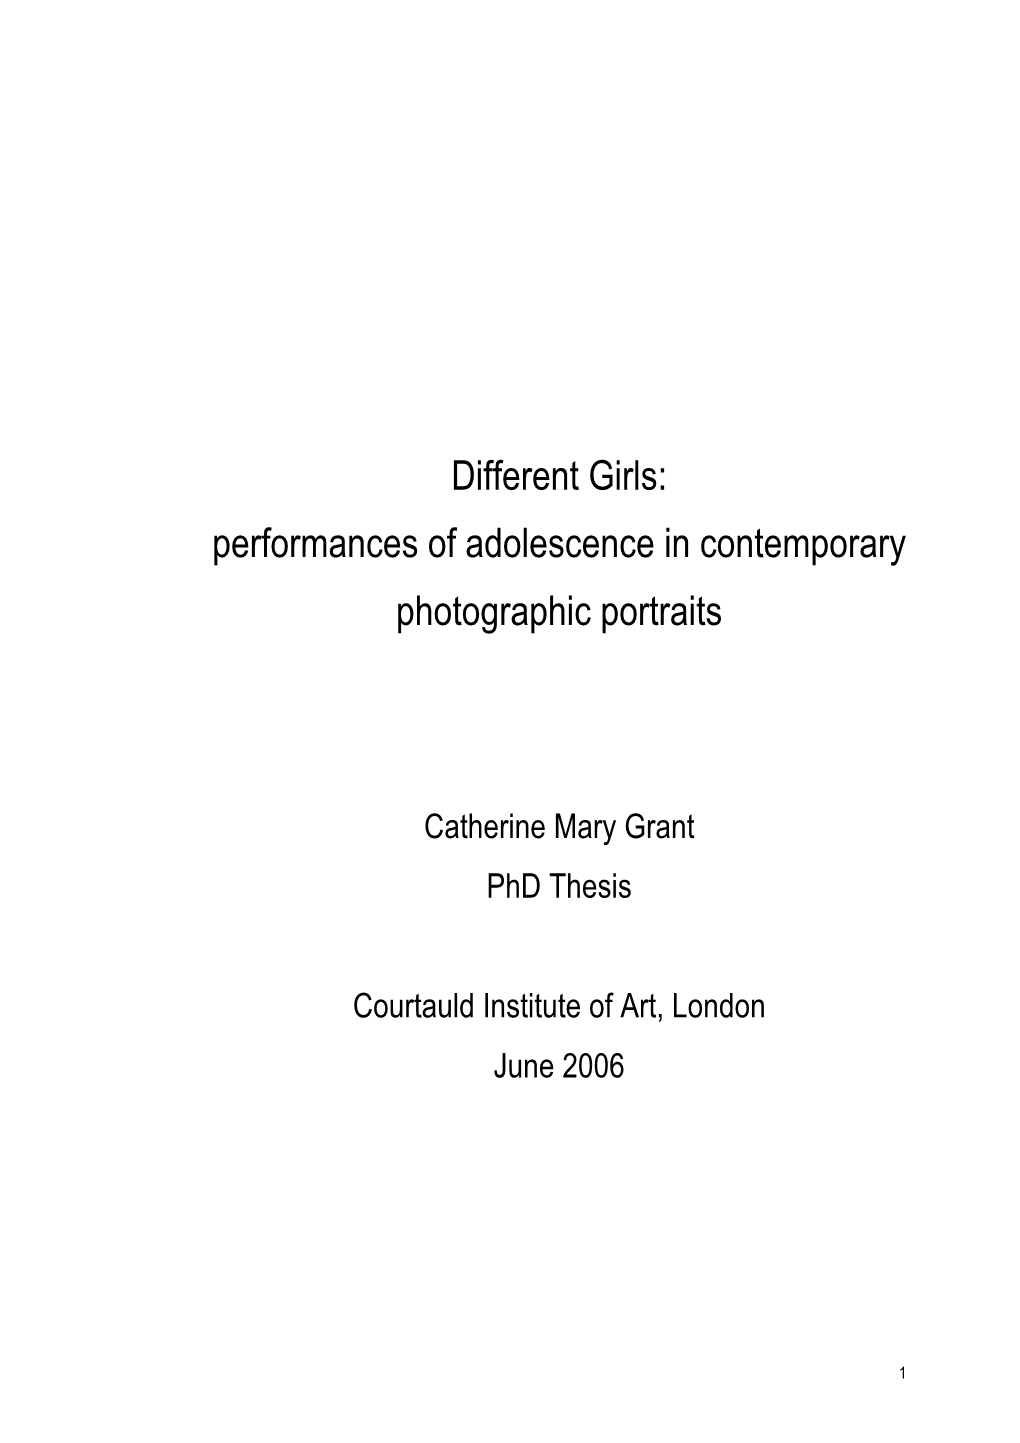 Performances of Adolescence in Contemporary Photographic Portraits